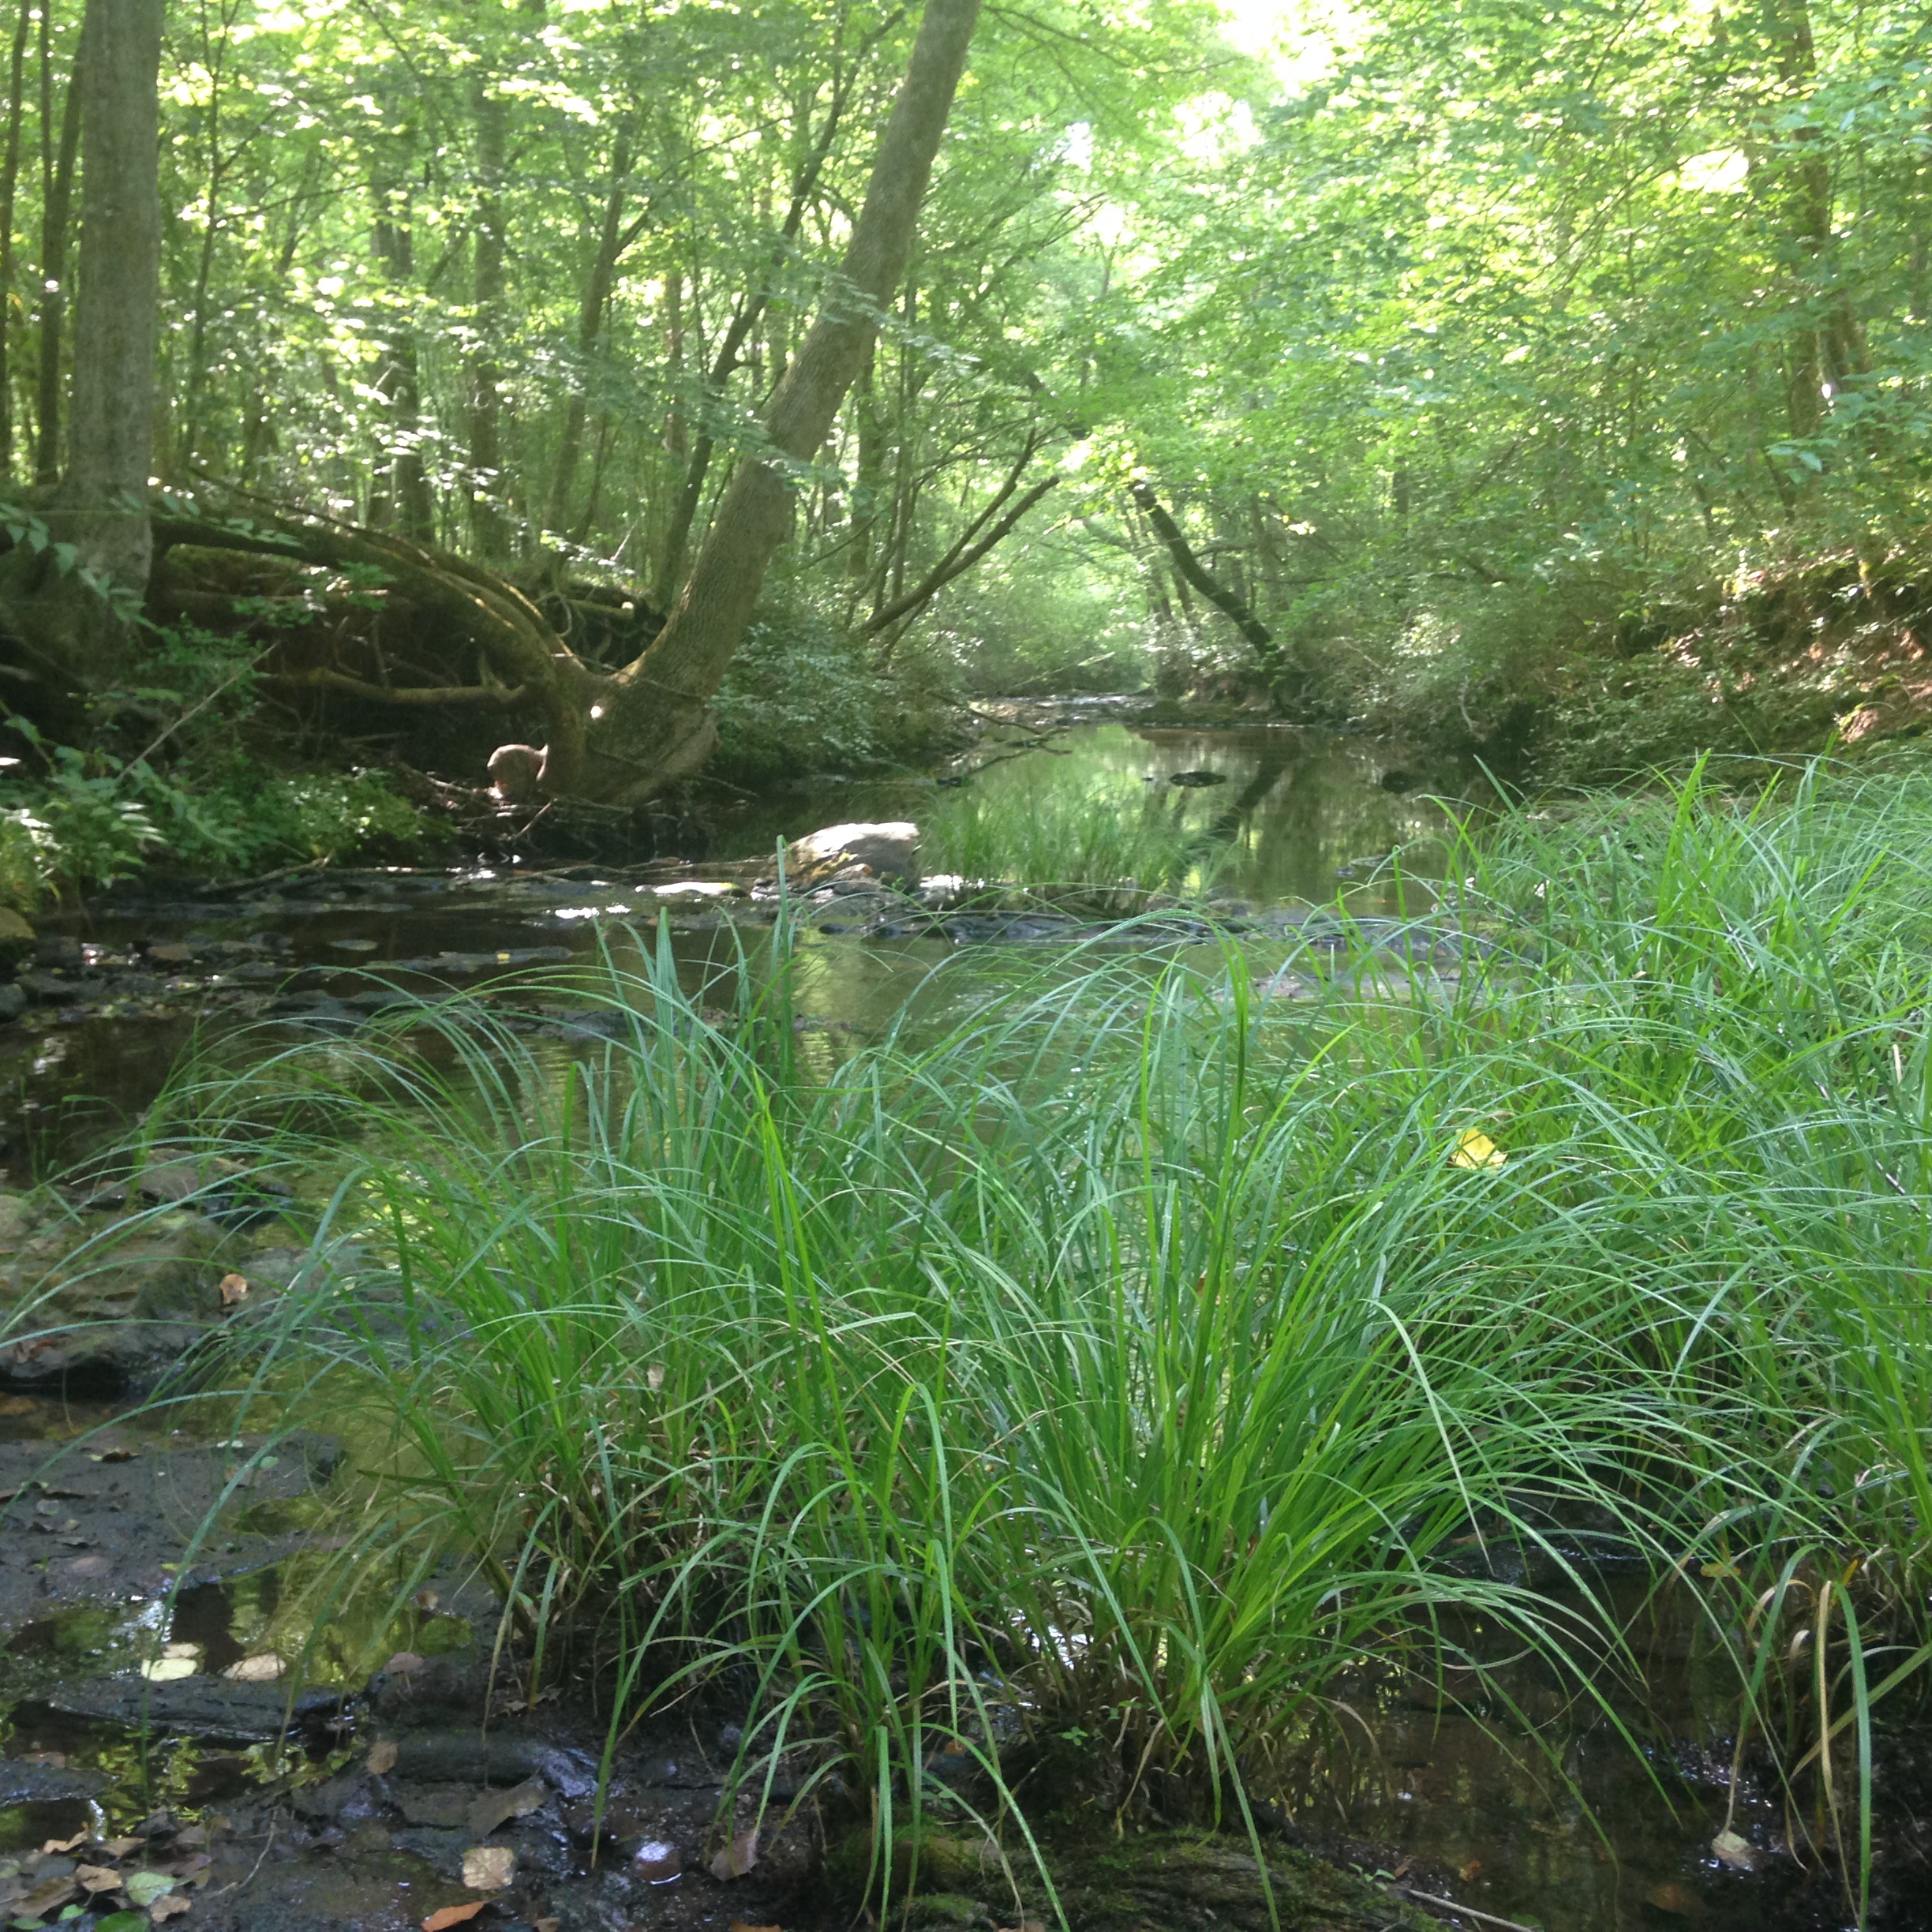 Lush grasses dominate the foreground of this photo with a shallow stream and forested area in the background.